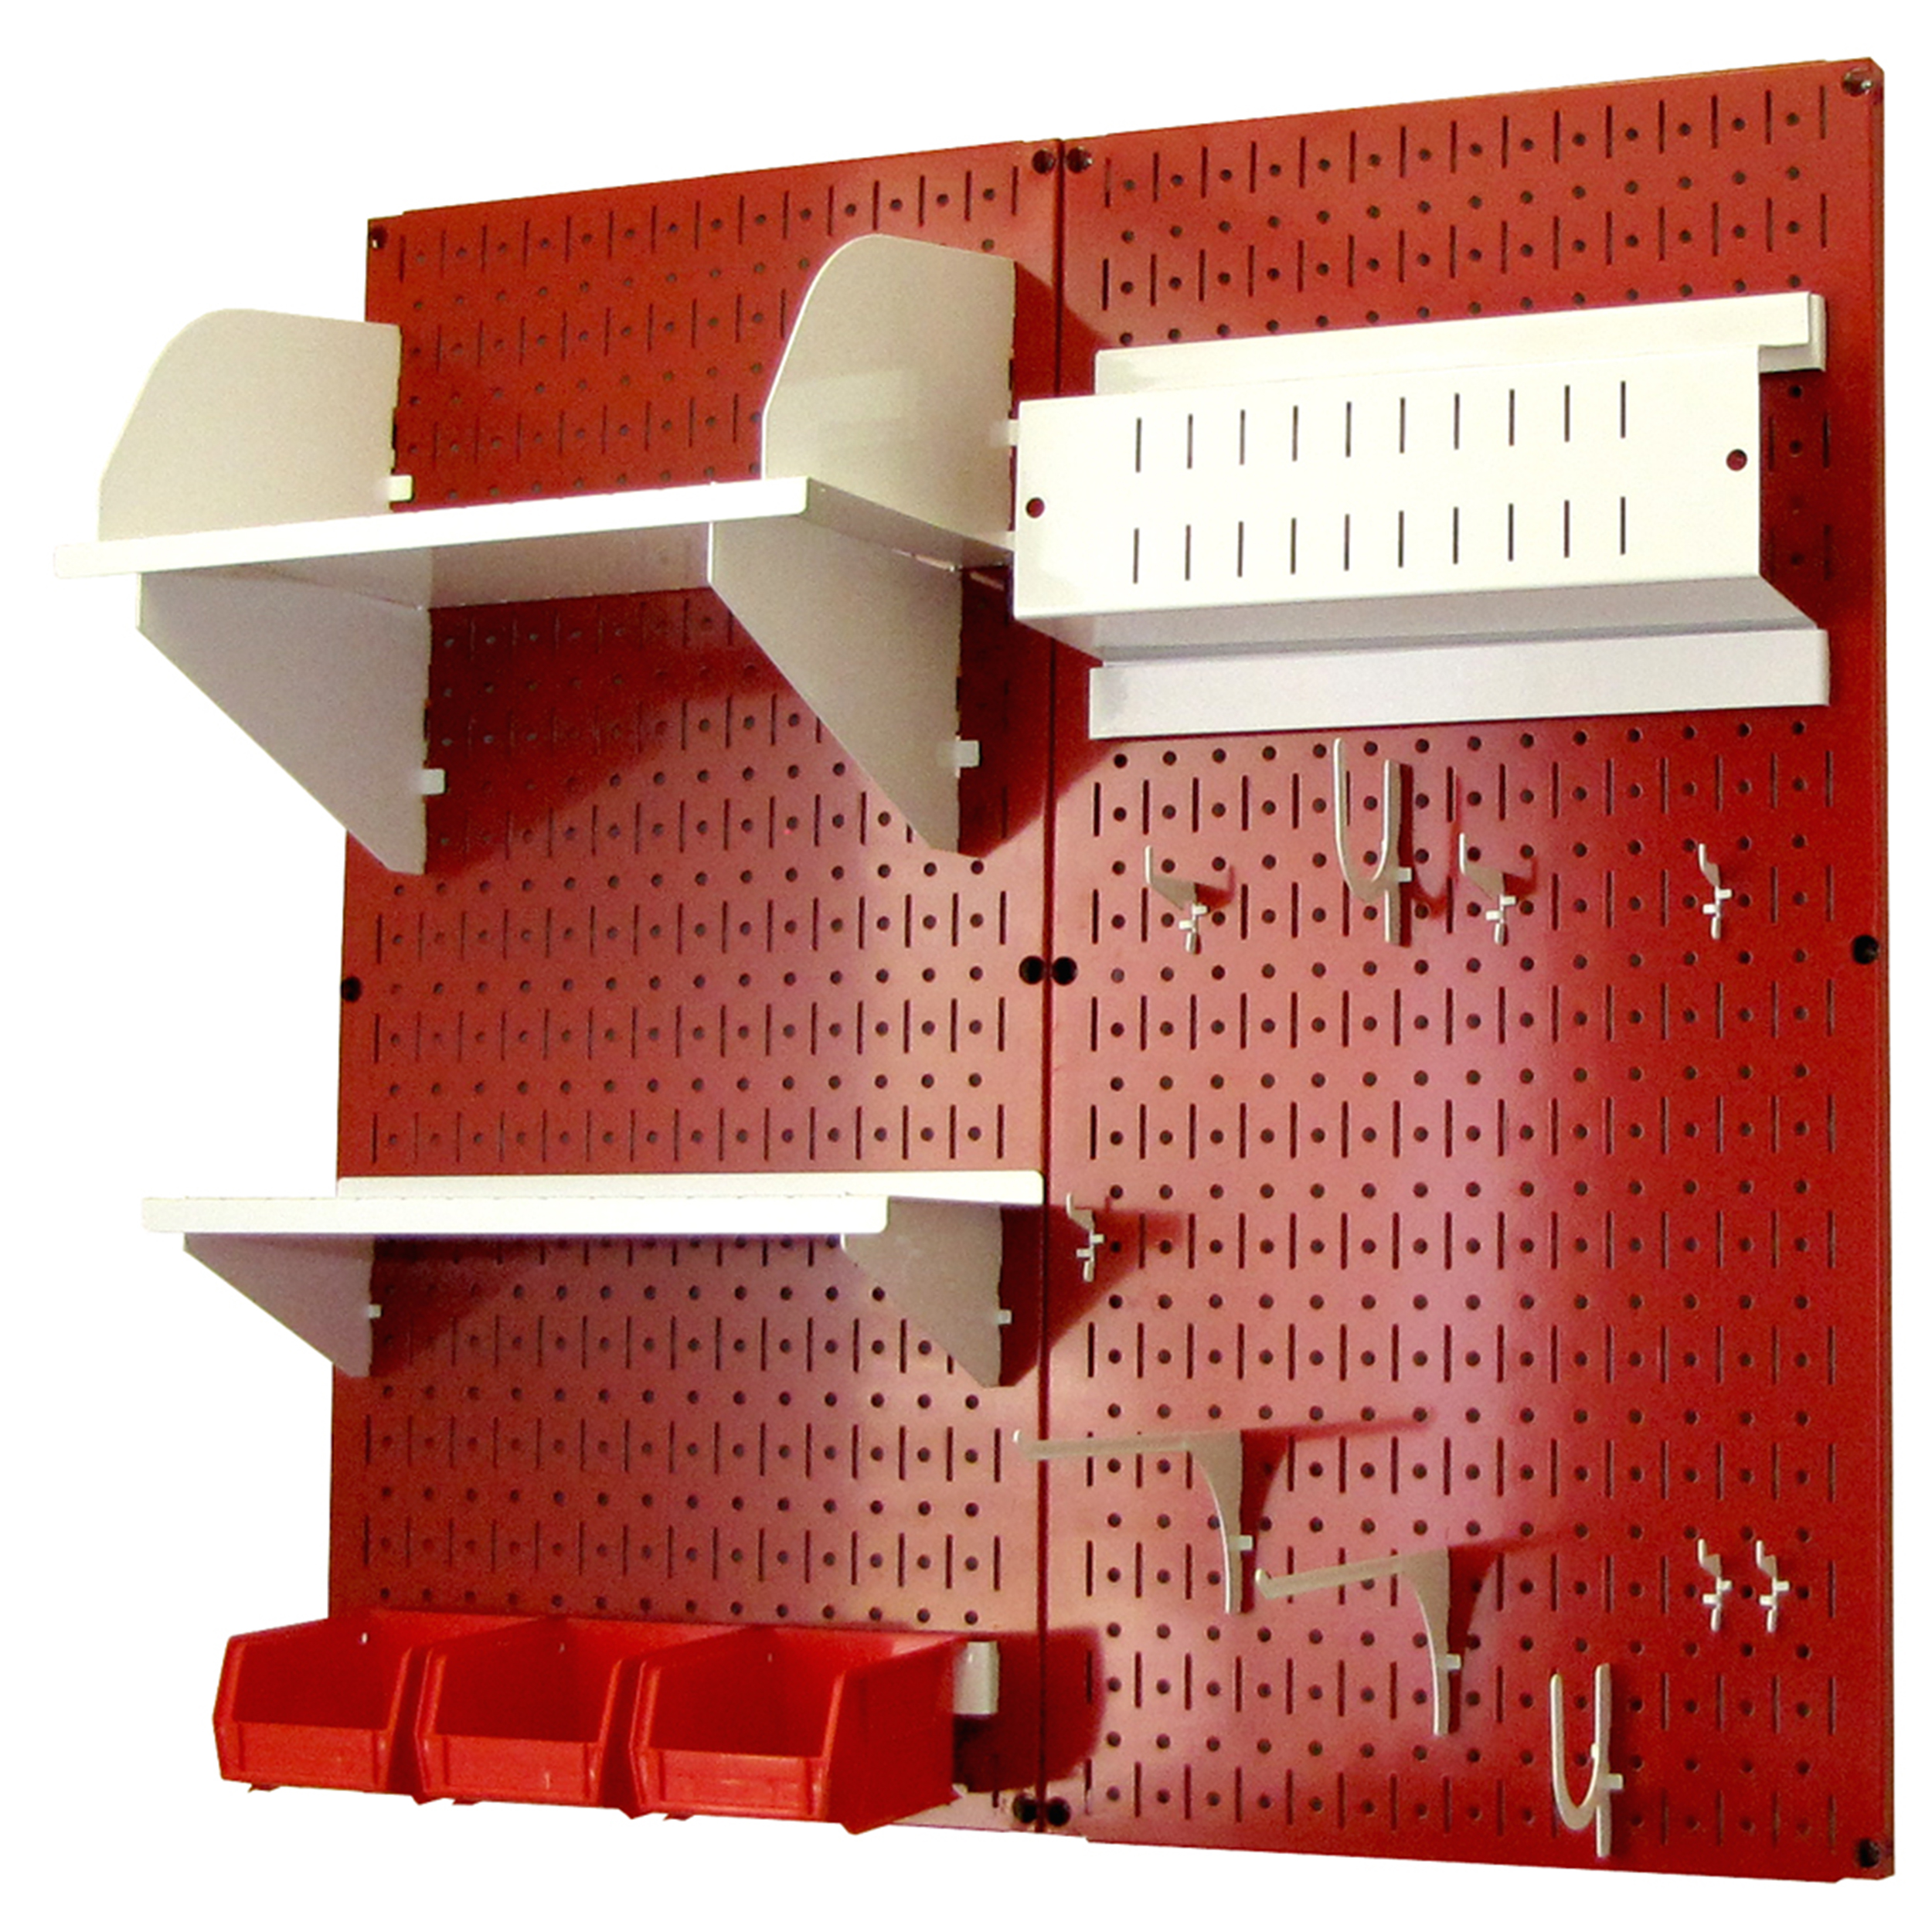 Pegboard Hobby Craft Pegboard Organizer Storage Kit With Red Pegboard And White Accessories